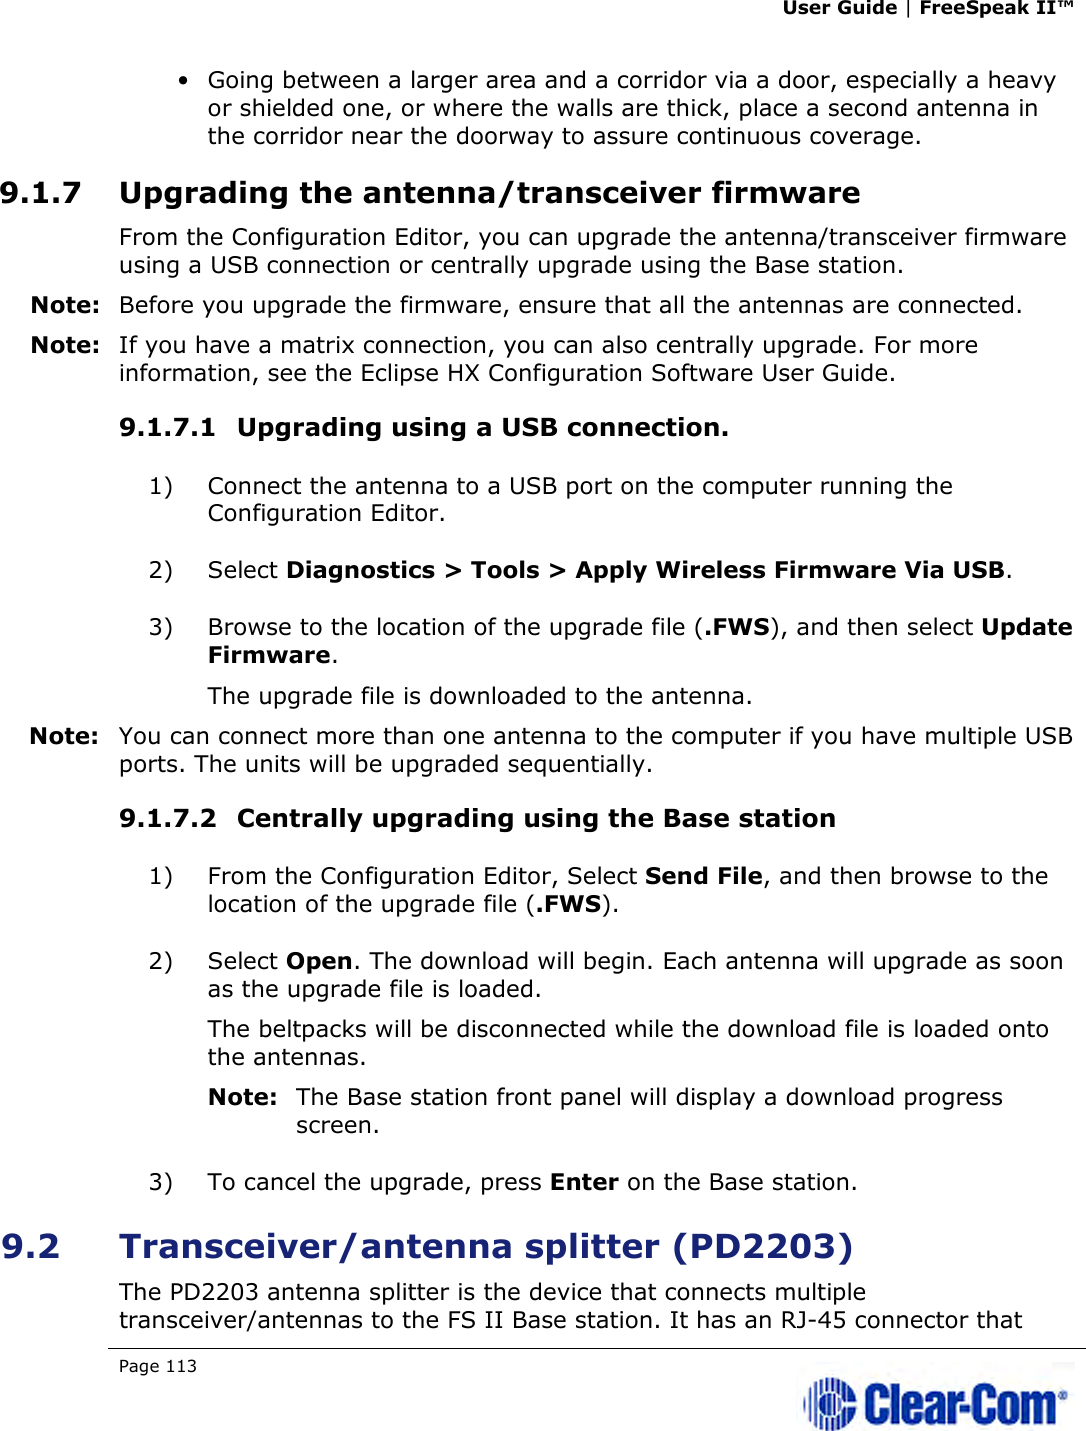 User Guide | FreeSpeak II™  Page 113   • Going between a larger area and a corridor via a door, especially a heavy or shielded one, or where the walls are thick, place a second antenna in the corridor near the doorway to assure continuous coverage. 9.1.7 Upgrading the antenna/transceiver firmware From the Configuration Editor, you can upgrade the antenna/transceiver firmware using a USB connection or centrally upgrade using the Base station. Note: Before you upgrade the firmware, ensure that all the antennas are connected. Note: If you have a matrix connection, you can also centrally upgrade. For more information, see the Eclipse HX Configuration Software User Guide. 9.1.7.1 Upgrading using a USB connection. 1) Connect the antenna to a USB port on the computer running the Configuration Editor. 2) Select Diagnostics &gt; Tools &gt; Apply Wireless Firmware Via USB. 3) Browse to the location of the upgrade file (.FWS), and then select Update Firmware. The upgrade file is downloaded to the antenna. Note: You can connect more than one antenna to the computer if you have multiple USB ports. The units will be upgraded sequentially. 9.1.7.2 Centrally upgrading using the Base station 1) From the Configuration Editor, Select Send File, and then browse to the location of the upgrade file (.FWS). 2) Select Open. The download will begin. Each antenna will upgrade as soon as the upgrade file is loaded. The beltpacks will be disconnected while the download file is loaded onto the antennas.  Note: The Base station front panel will display a download progress screen. 3) To cancel the upgrade, press Enter on the Base station. 9.2 Transceiver/antenna splitter (PD2203) The PD2203 antenna splitter is the device that connects multiple transceiver/antennas to the FS II Base station. It has an RJ-45 connector that 